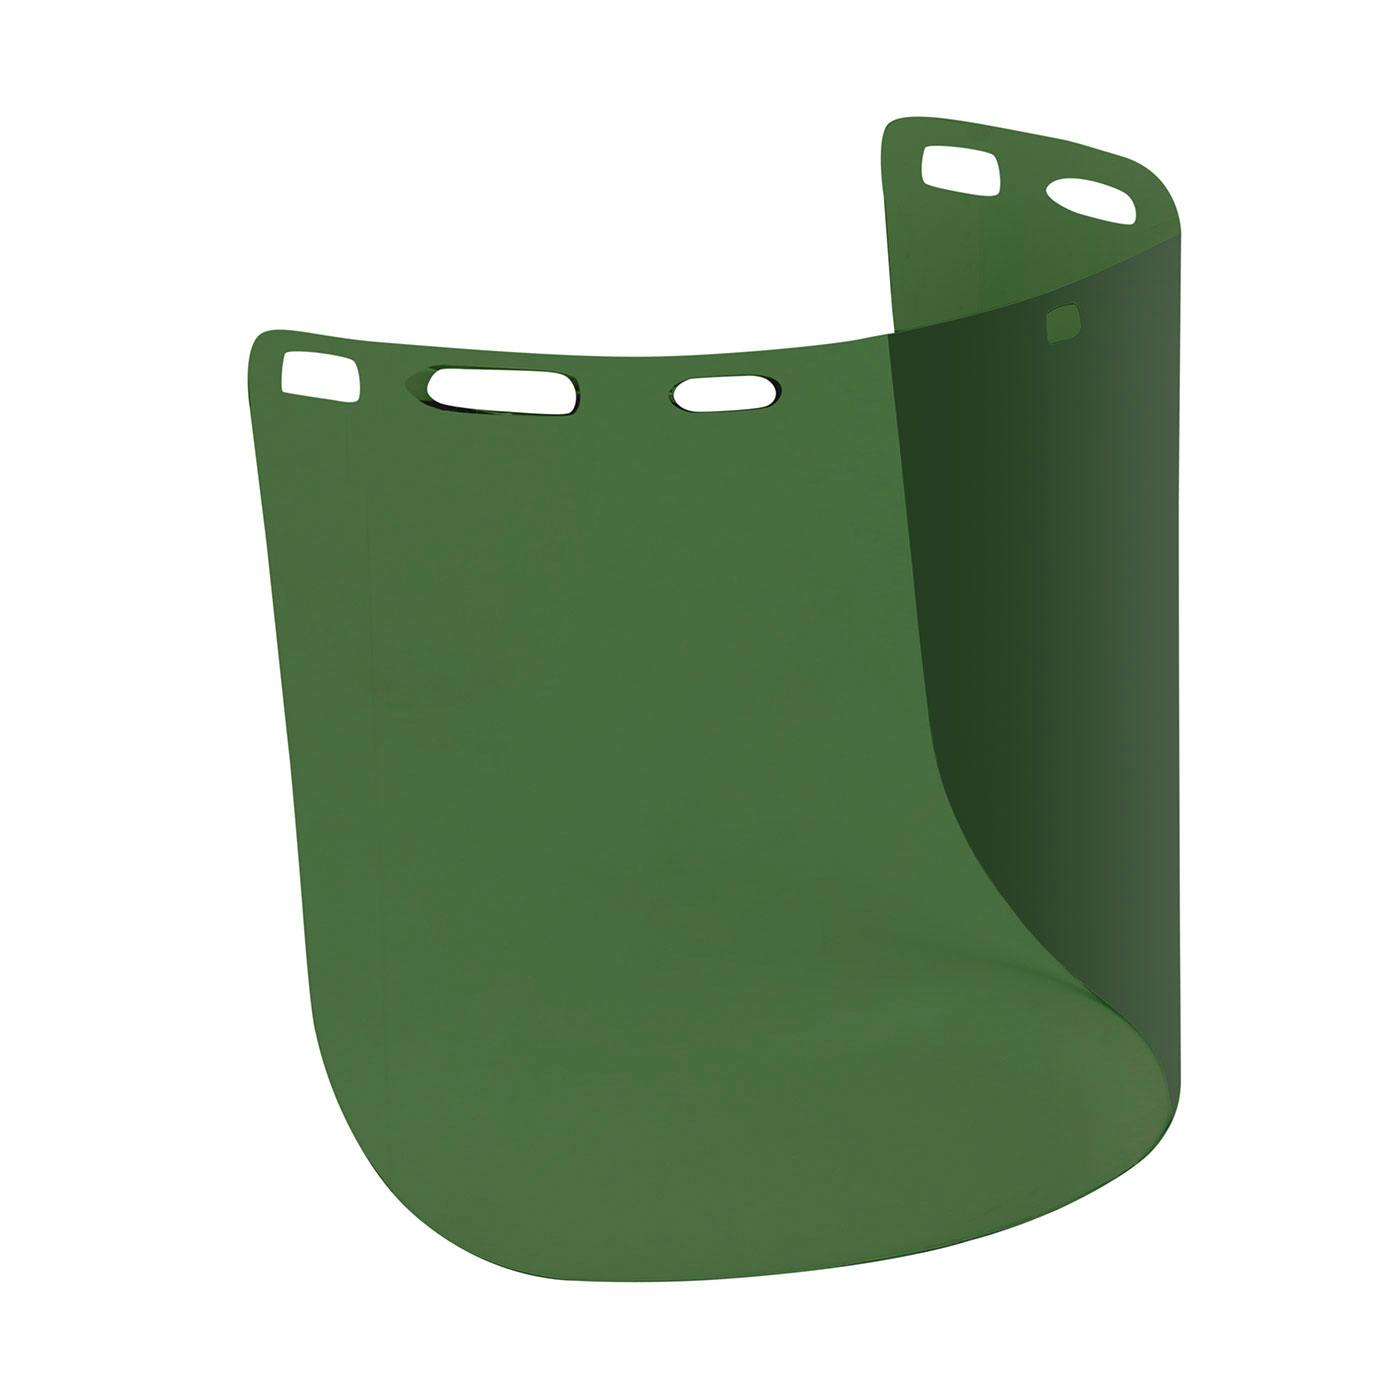 Uncoated Polycarbonate Safety Visor - Dark Green Tint, Green (251-01-7312) - OS_1